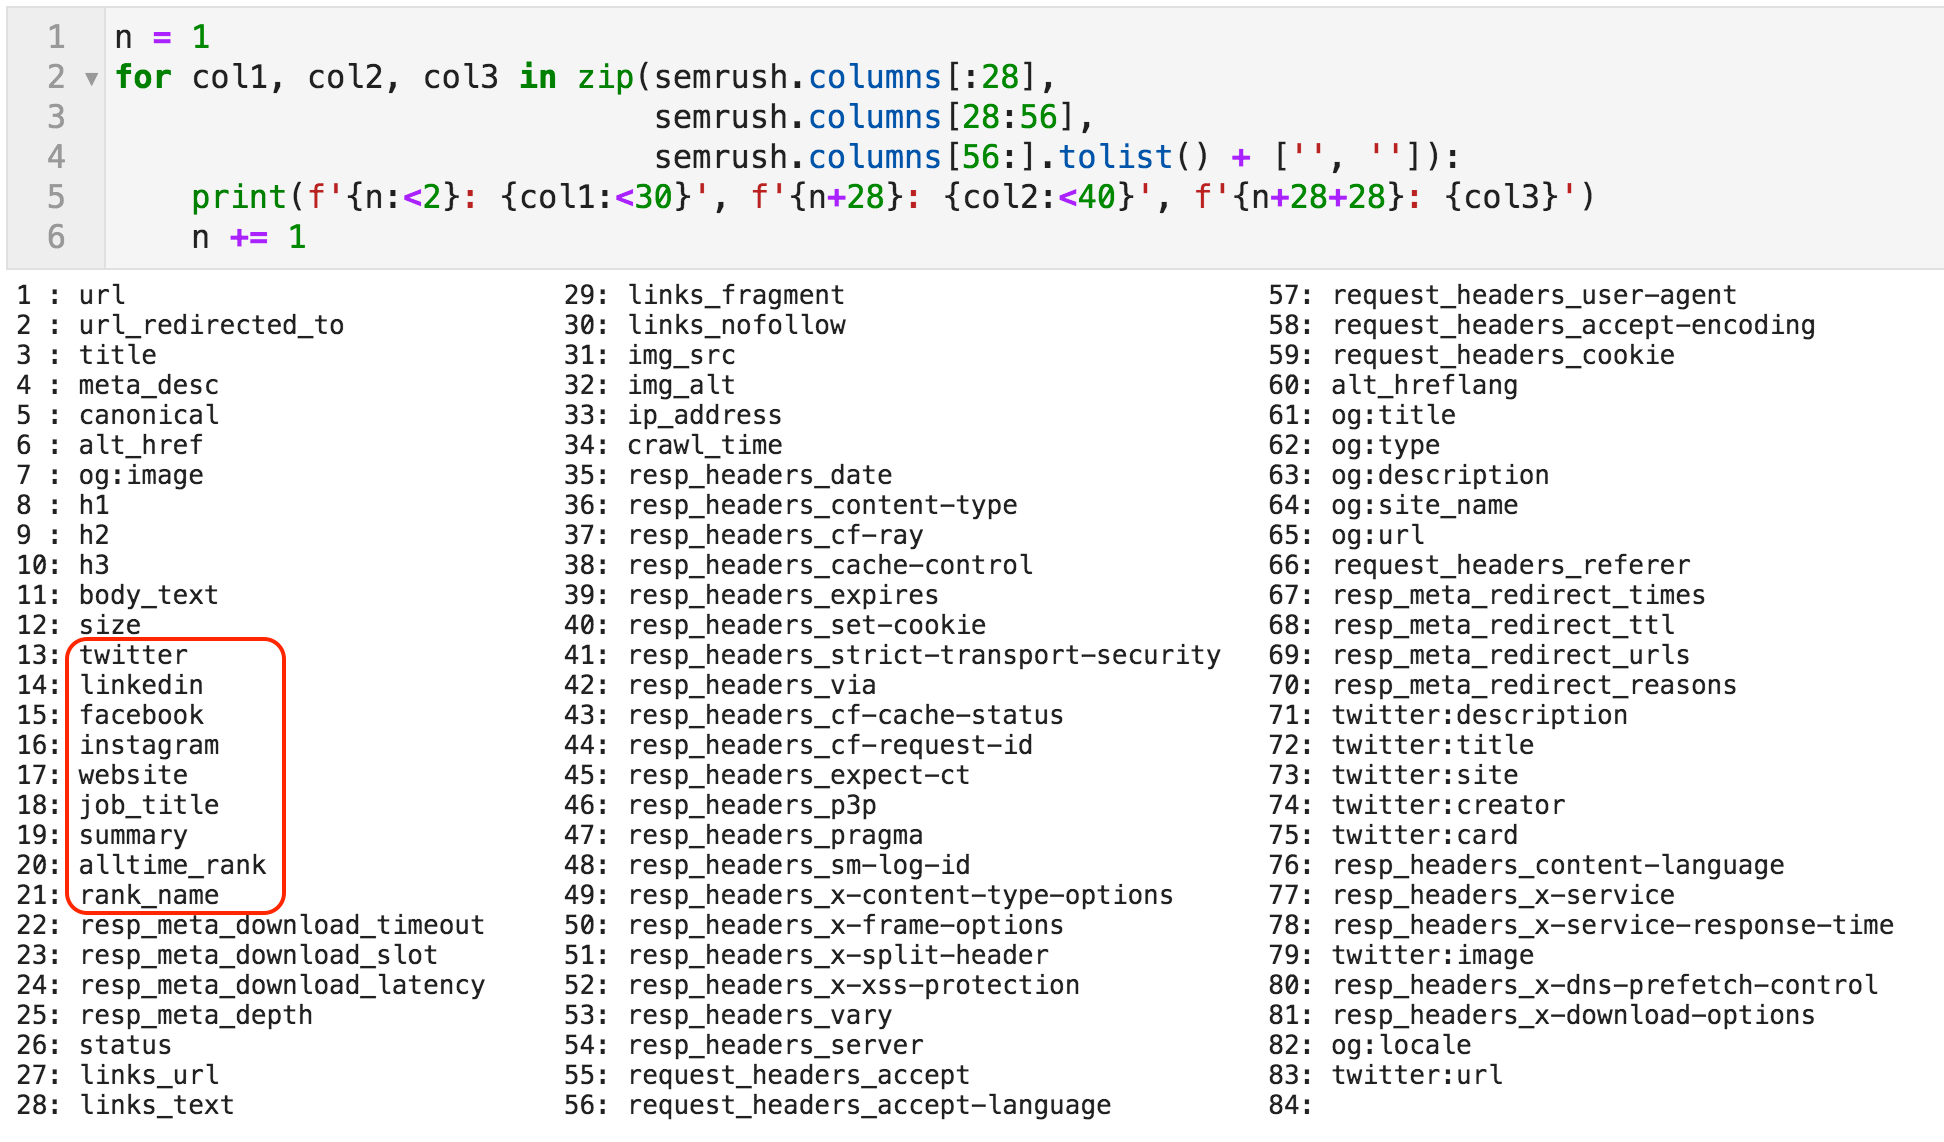 Screenshot of a list of all the columns in the crawl file